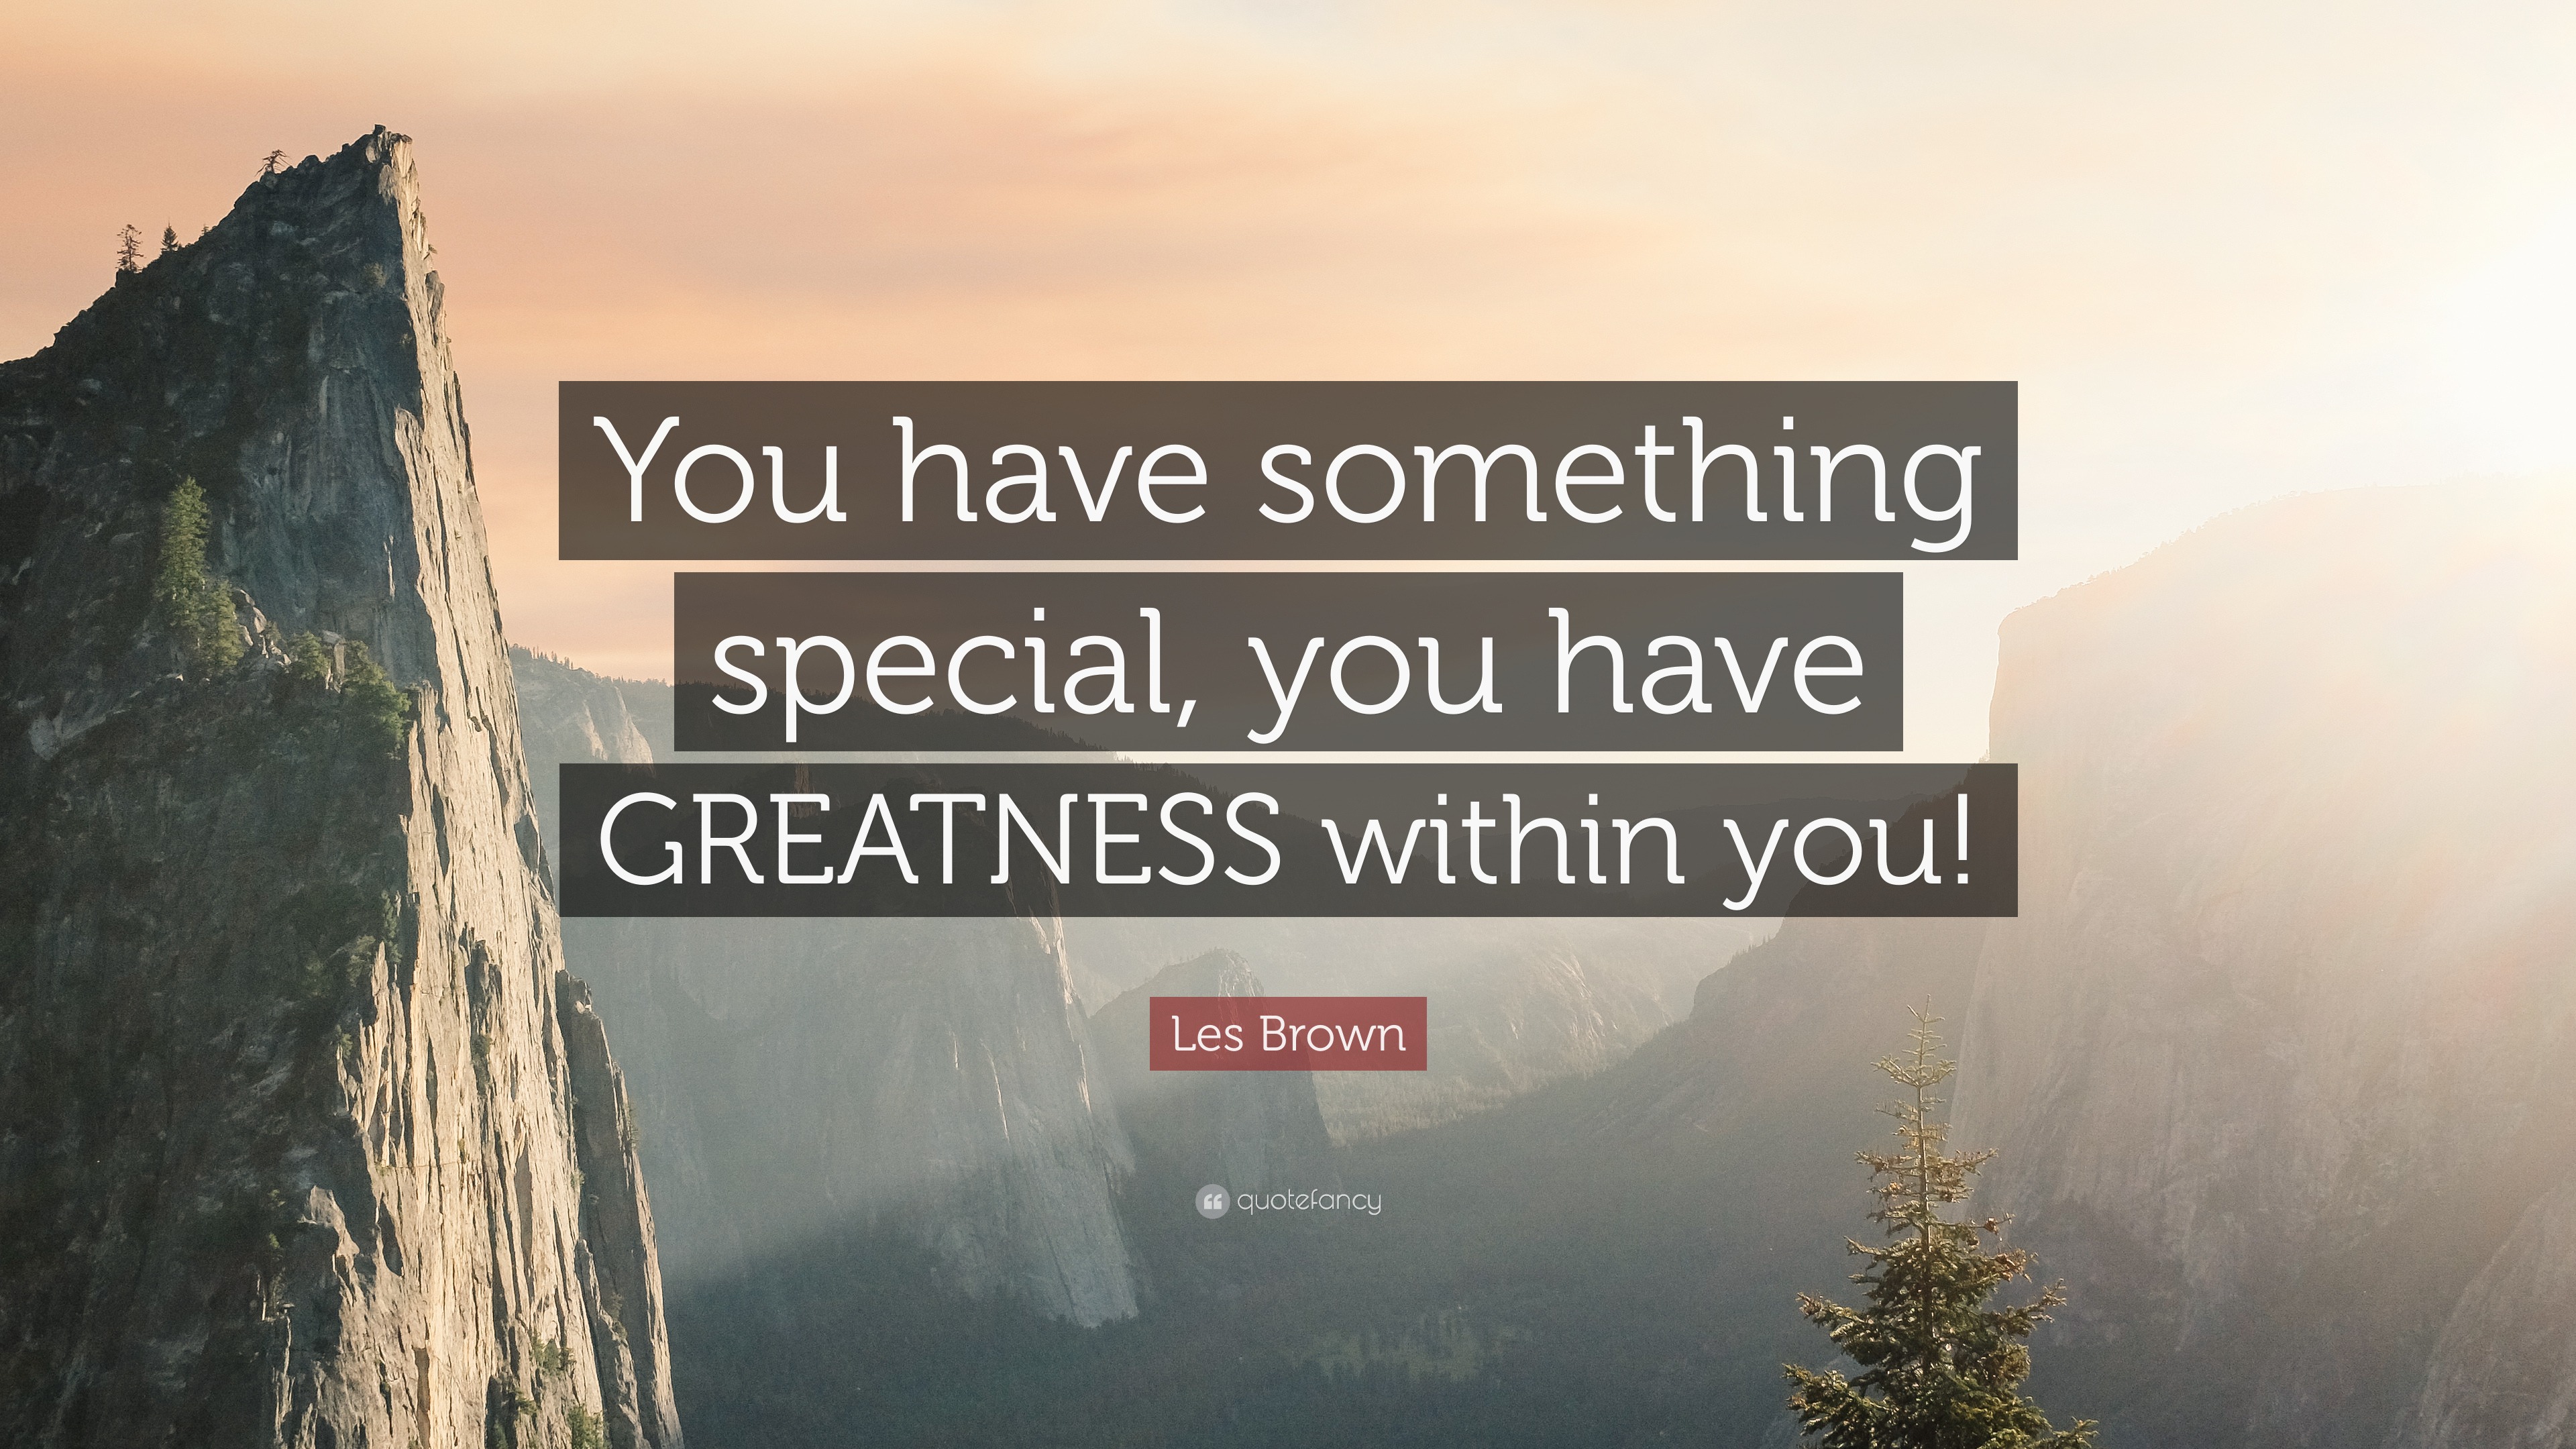 Les Brown Quote “You have something special, you have